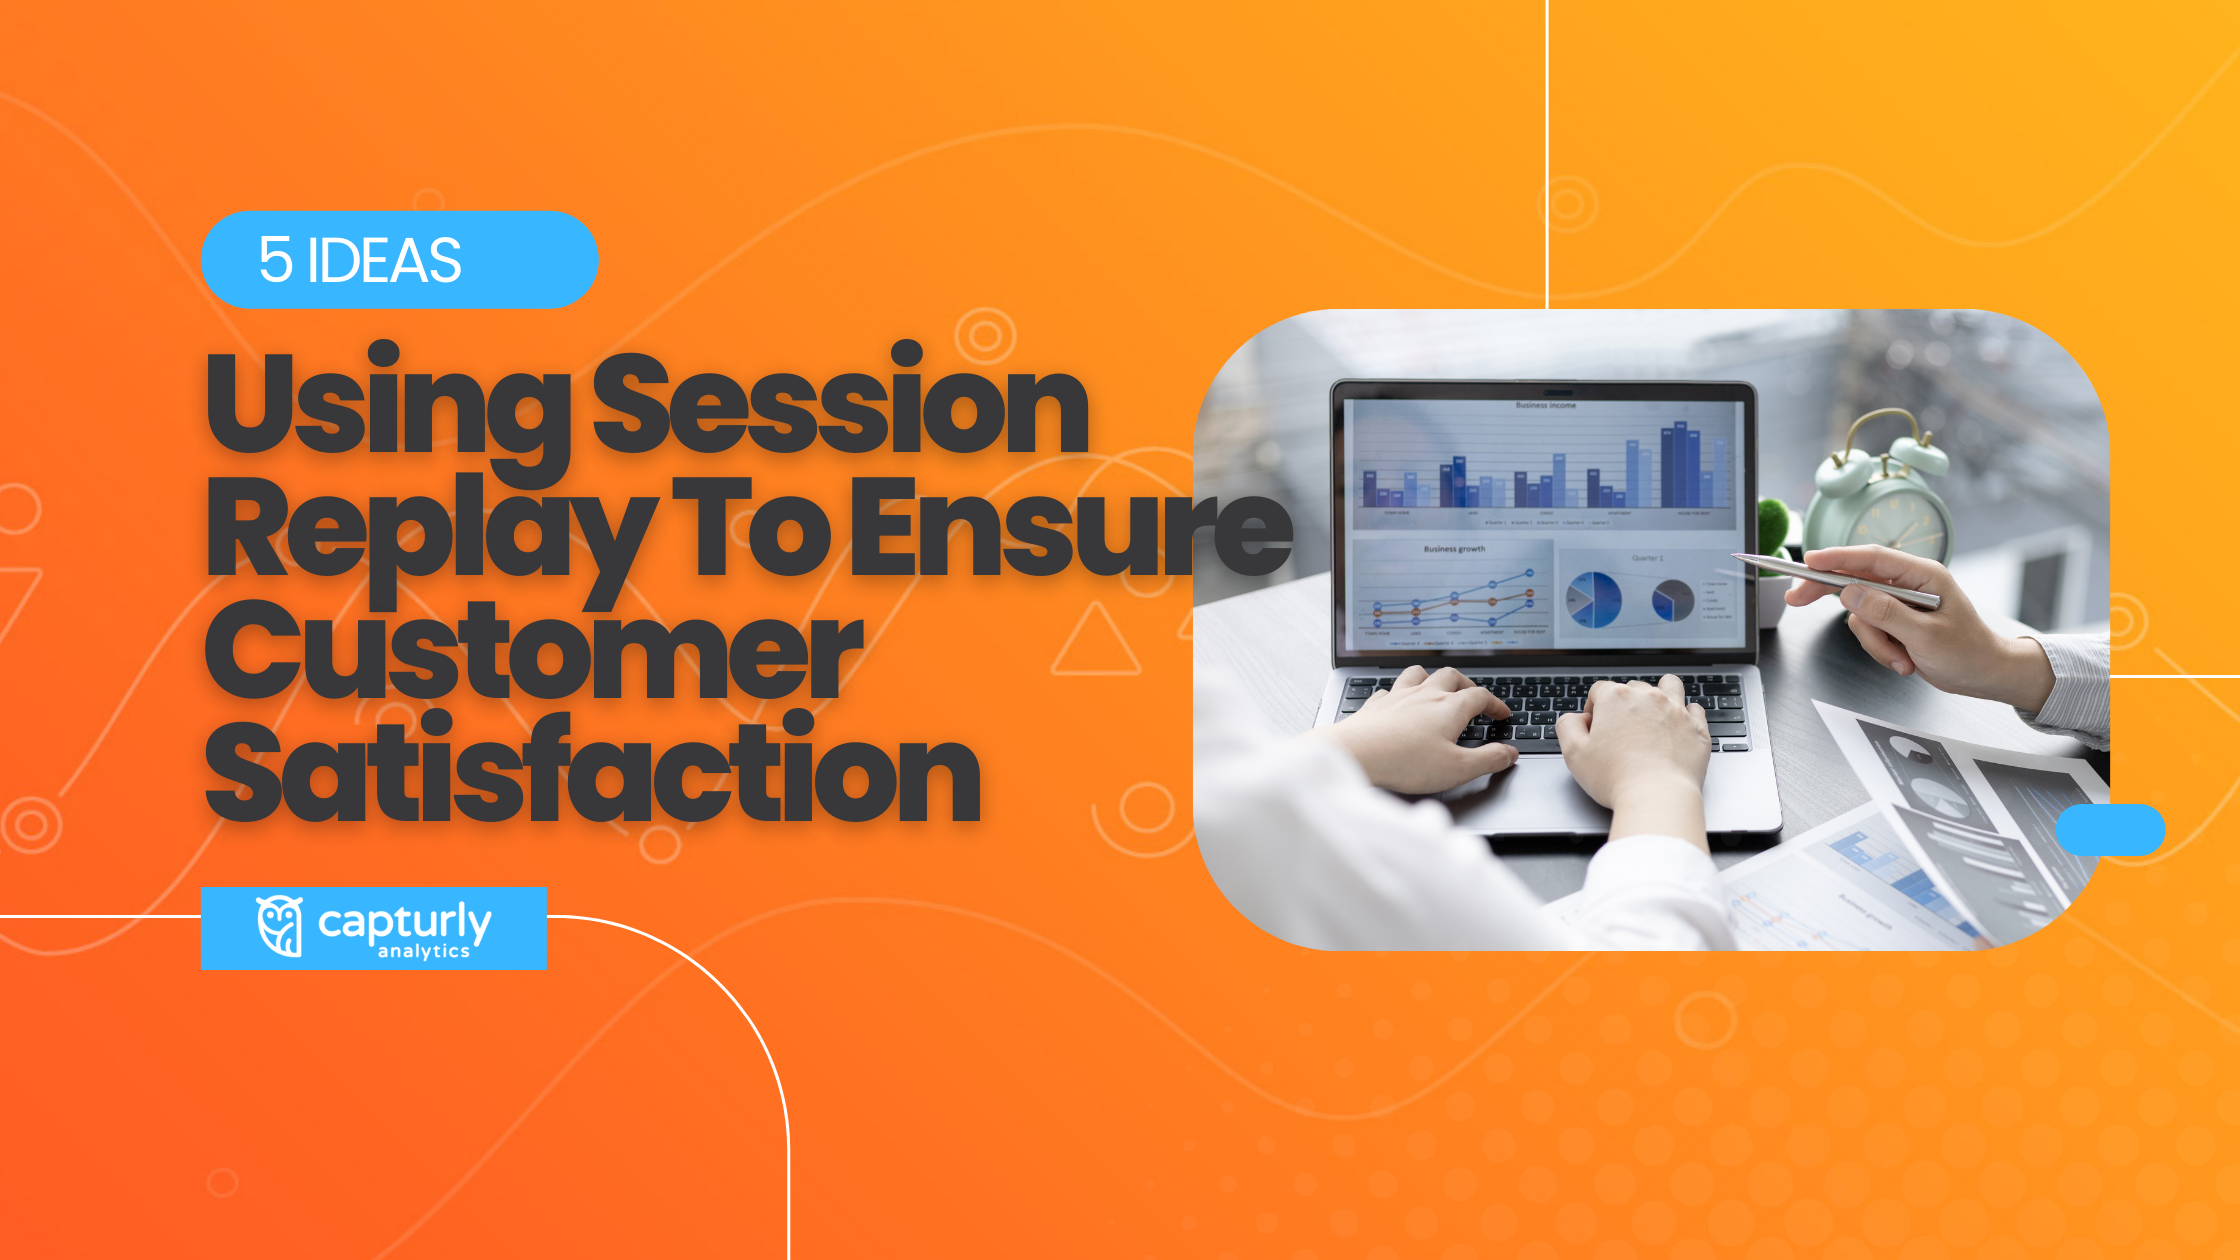 Using Session Replay To Ensure Customer Satisfaction